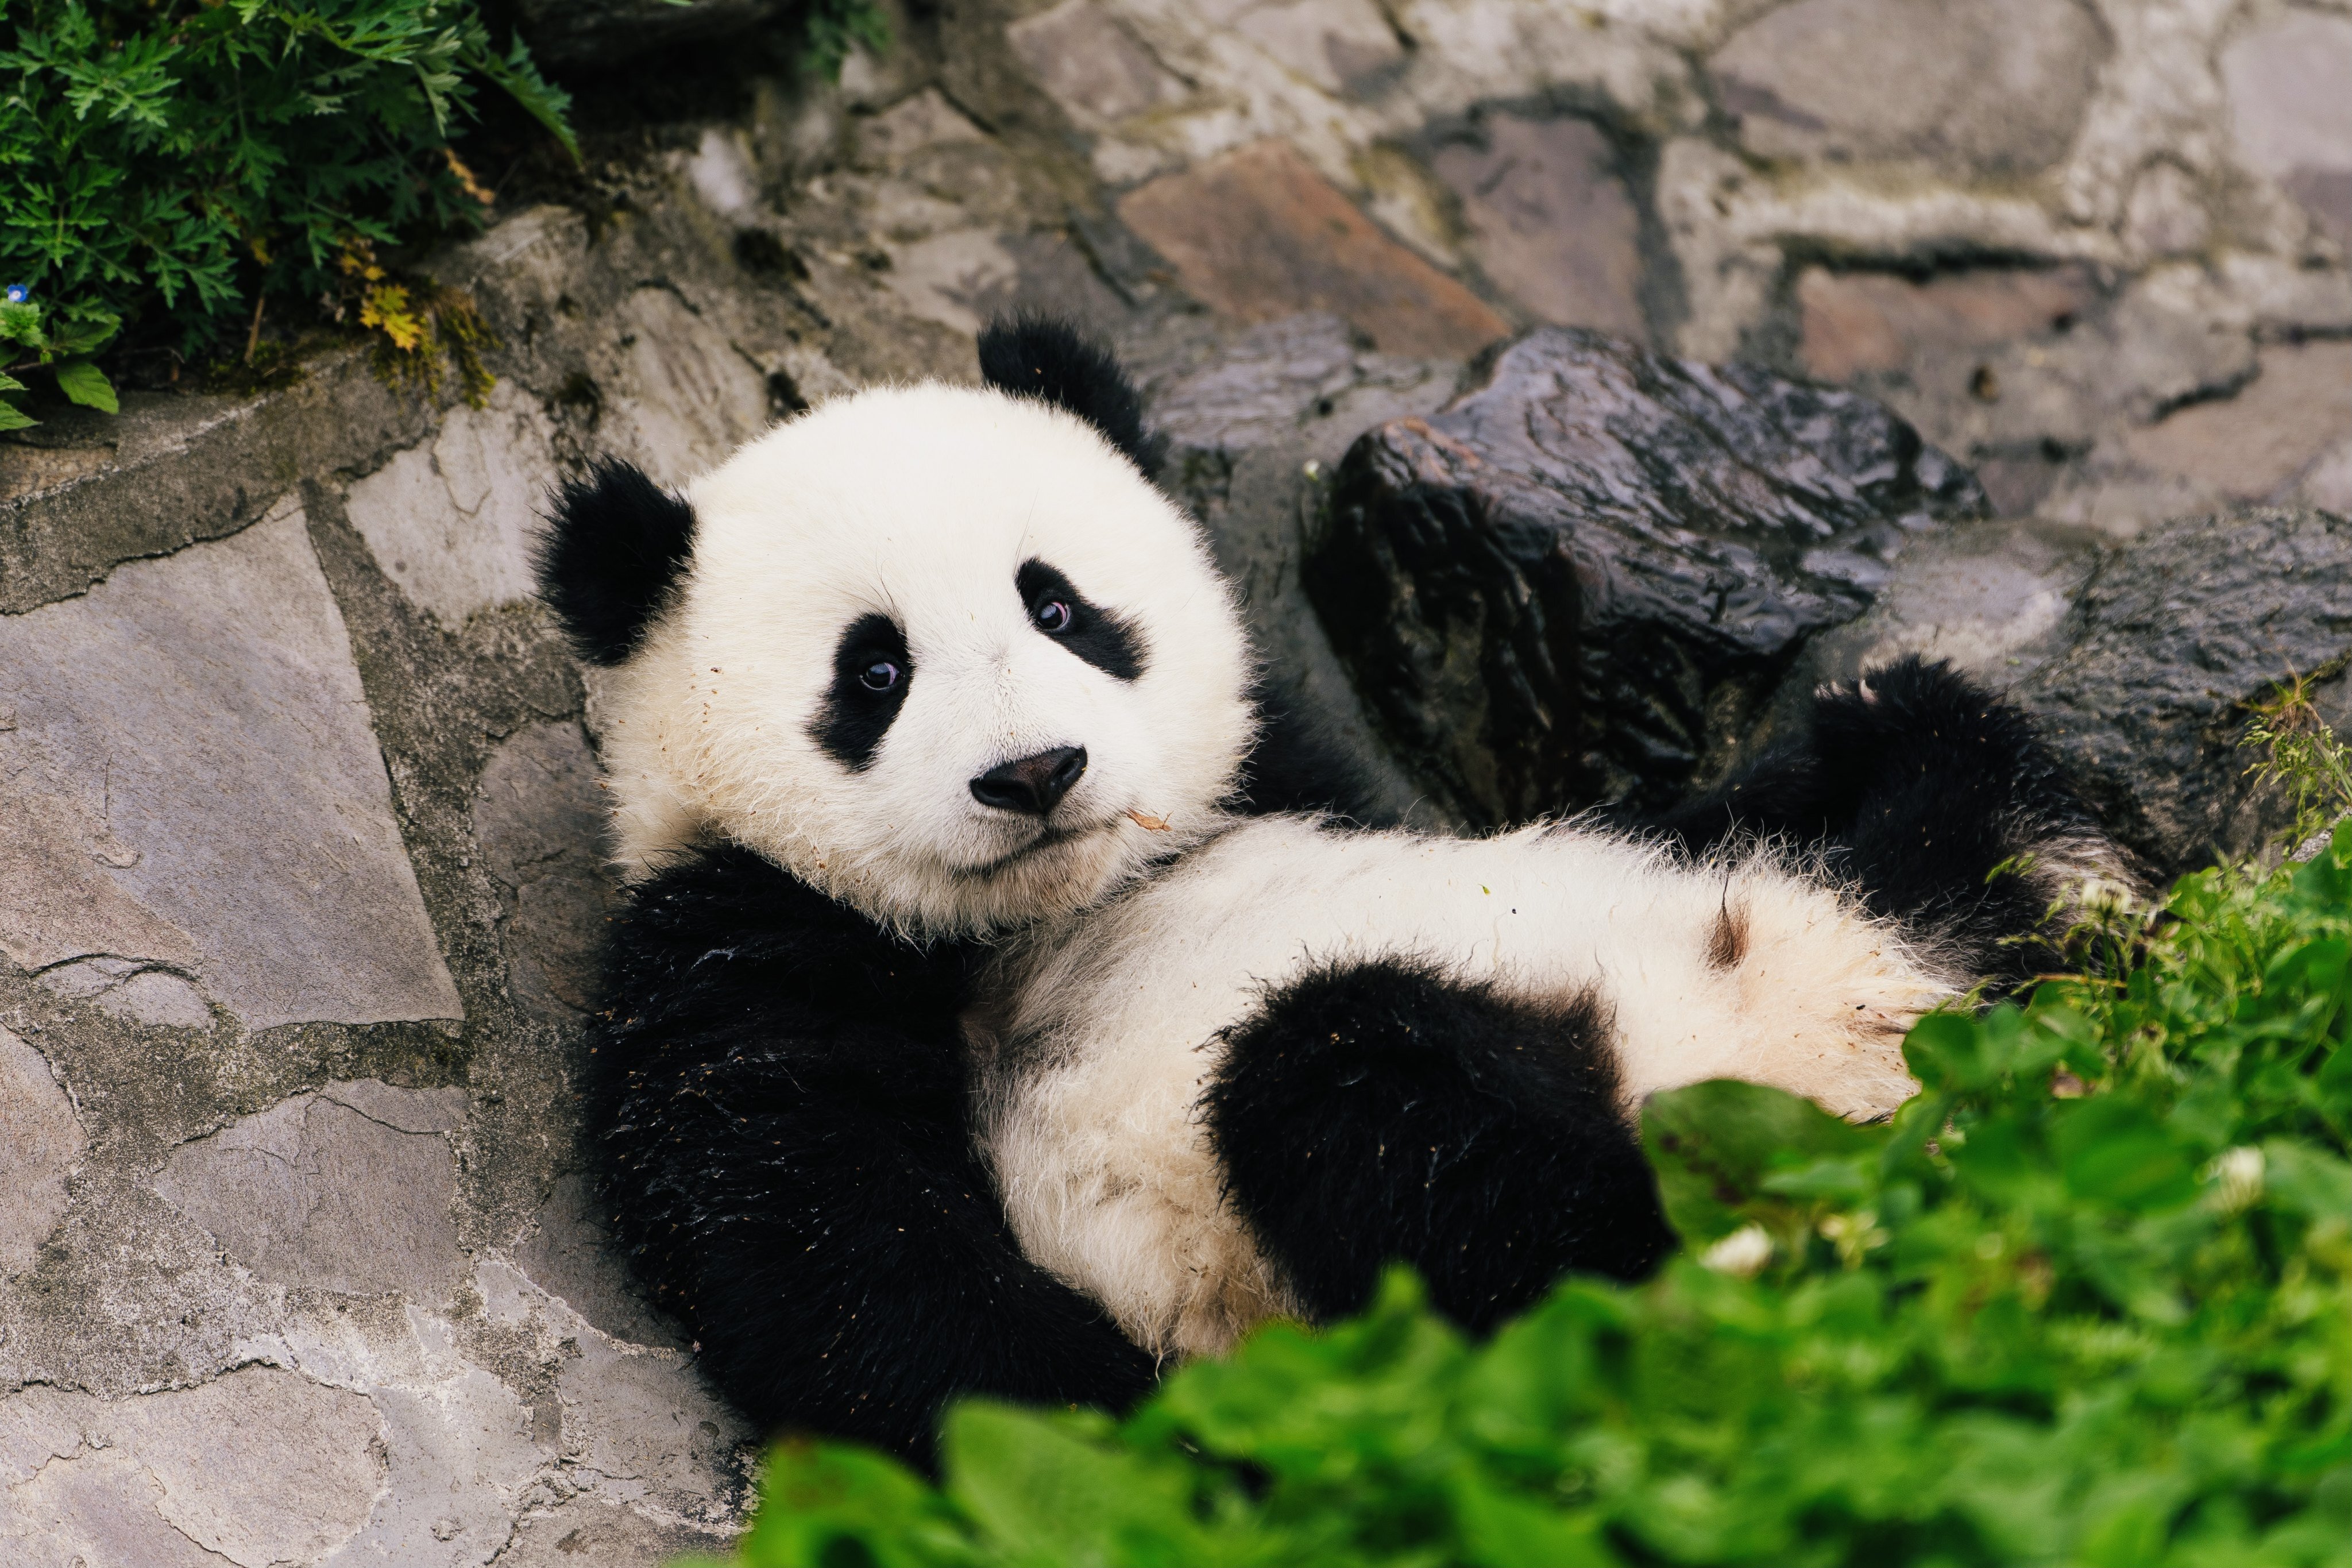 Despite eating an entirely plant-based diet, giant pandas are known for being a bit pudgy. Photo: Xinhua